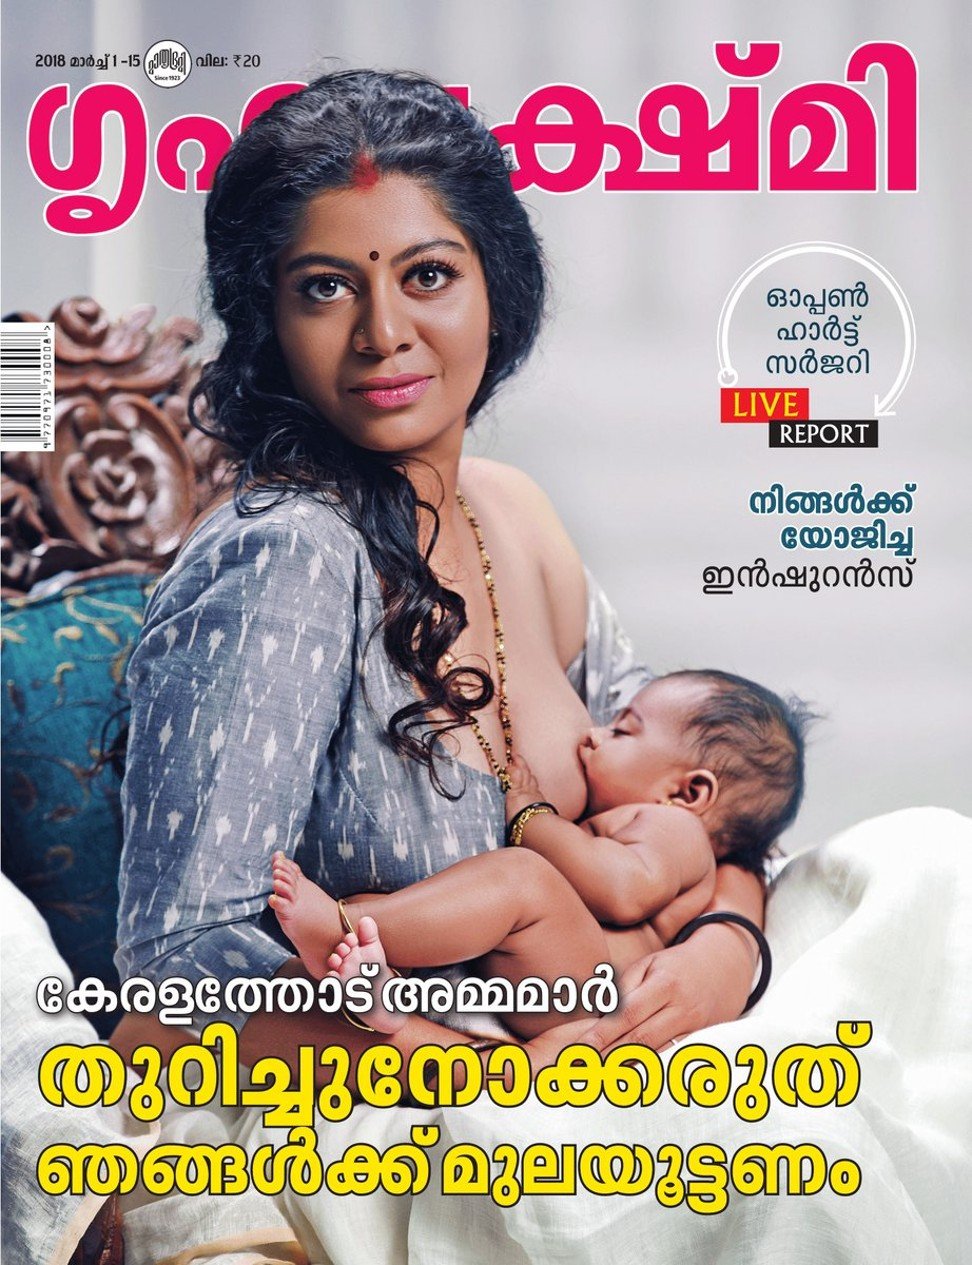 This photo of a mother breastfeeding on the cover of Indian magazine Grihalakshmi caused an uproar.